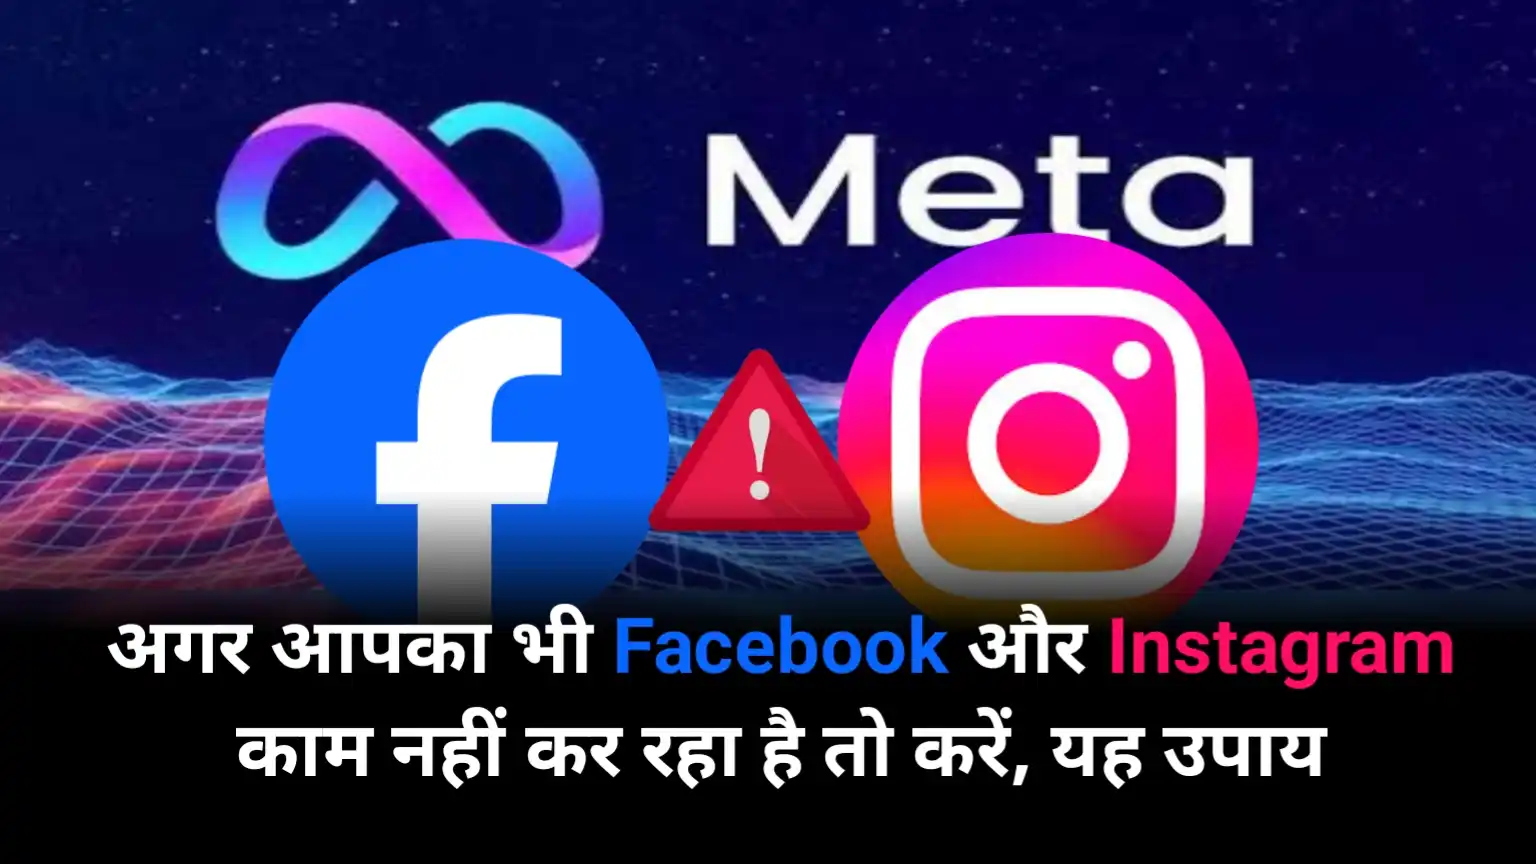 If your Facebook and Instagram are not working then try this solution